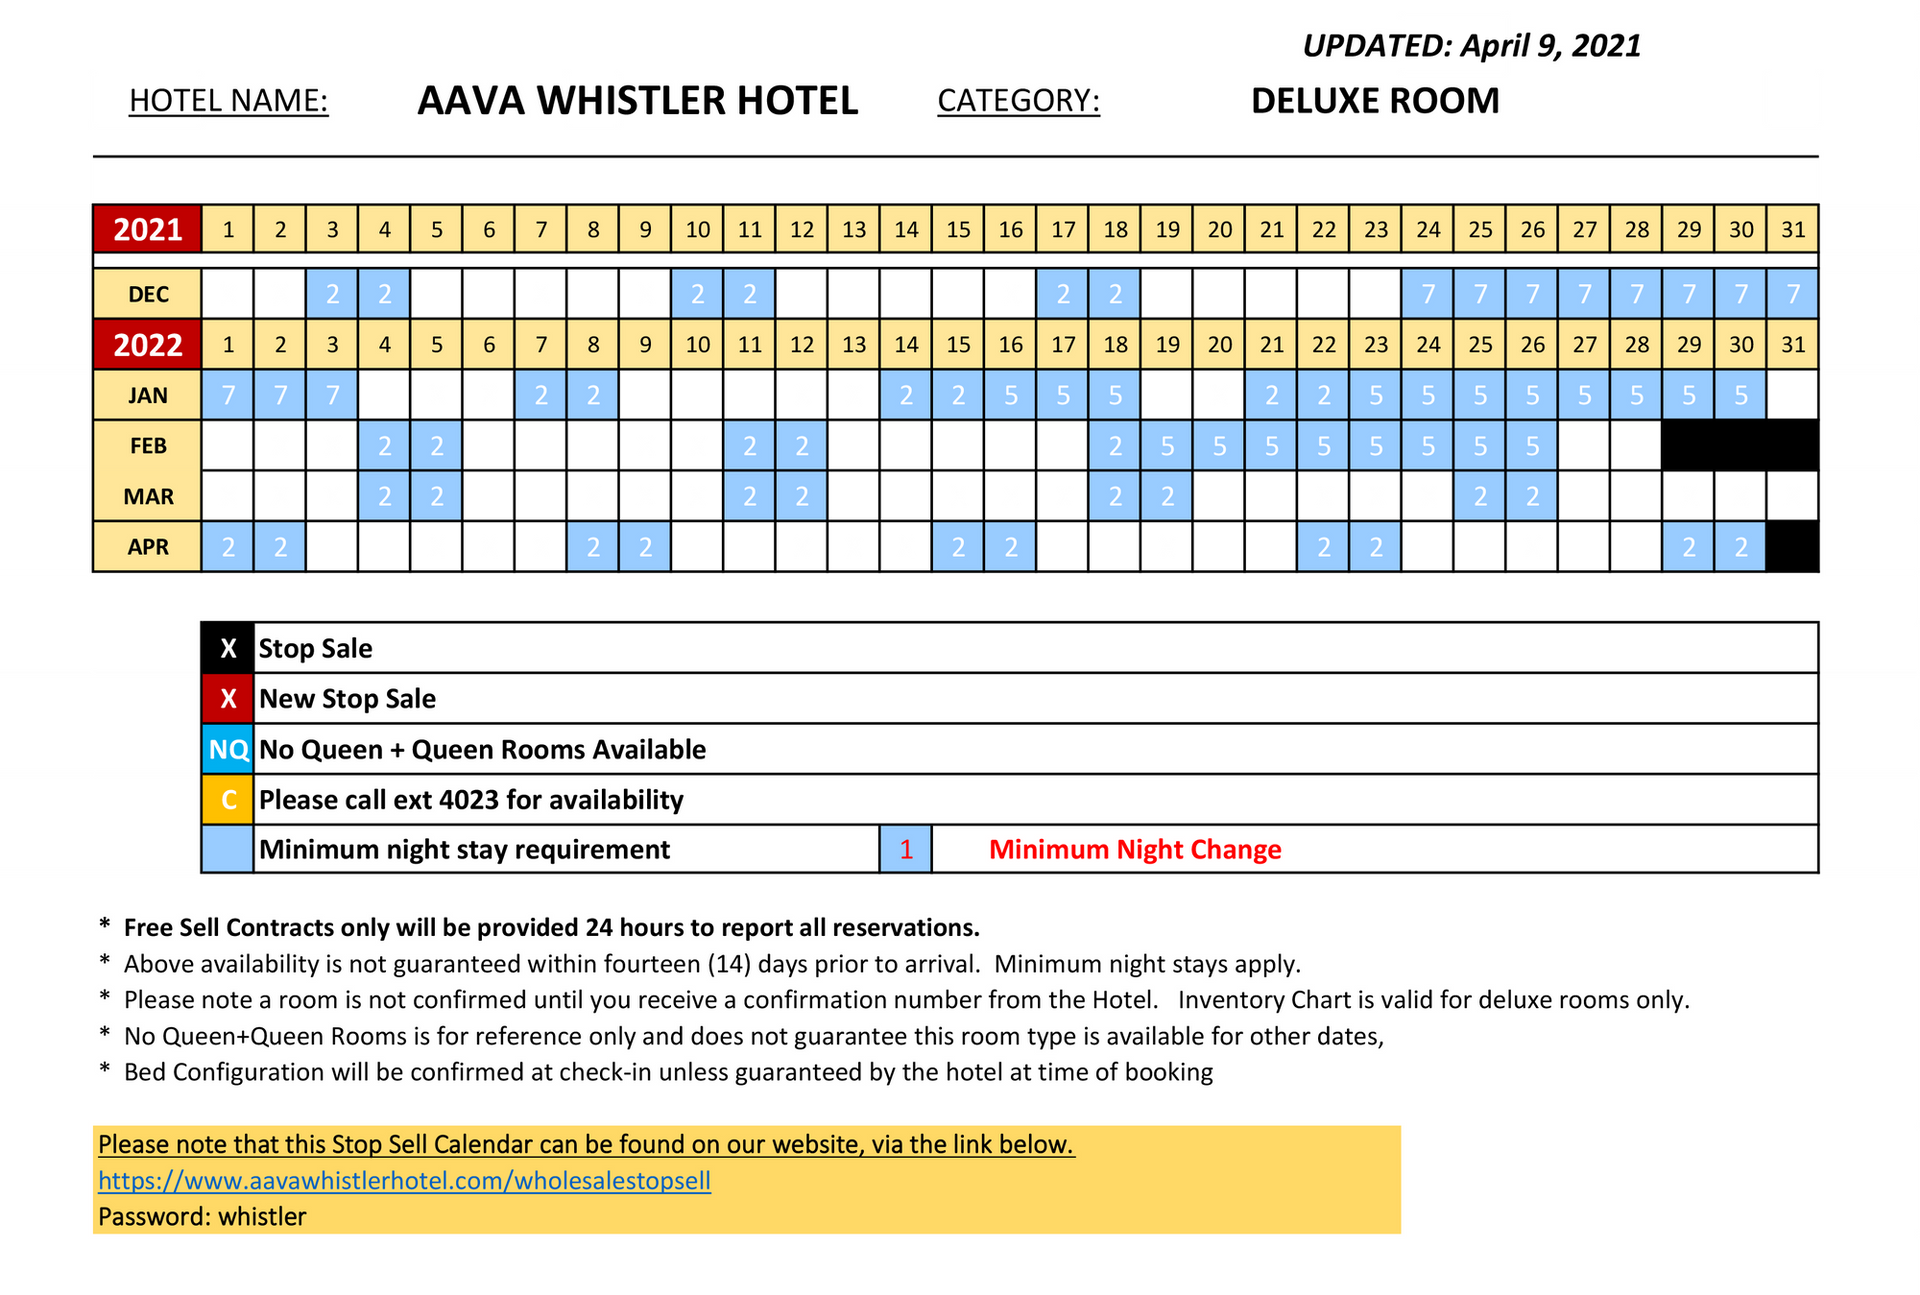 Deluxe Room reservation chart at Aava Whistler Hotel